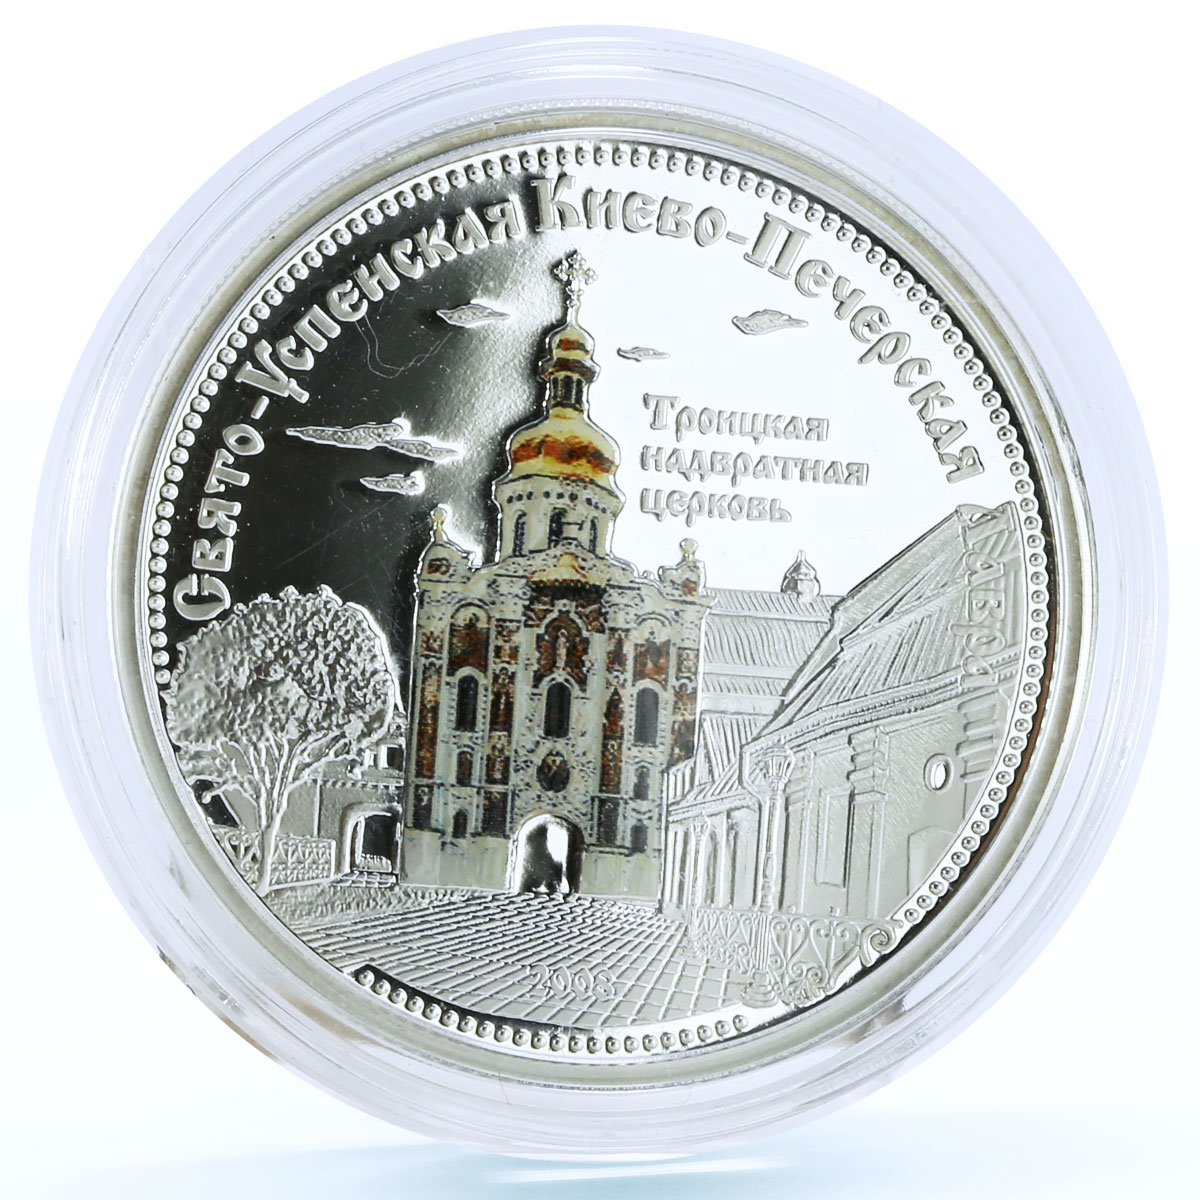 Cook Islands 5 dollars Pechersk Gate Trinity Church Architecture Ag coin 2008